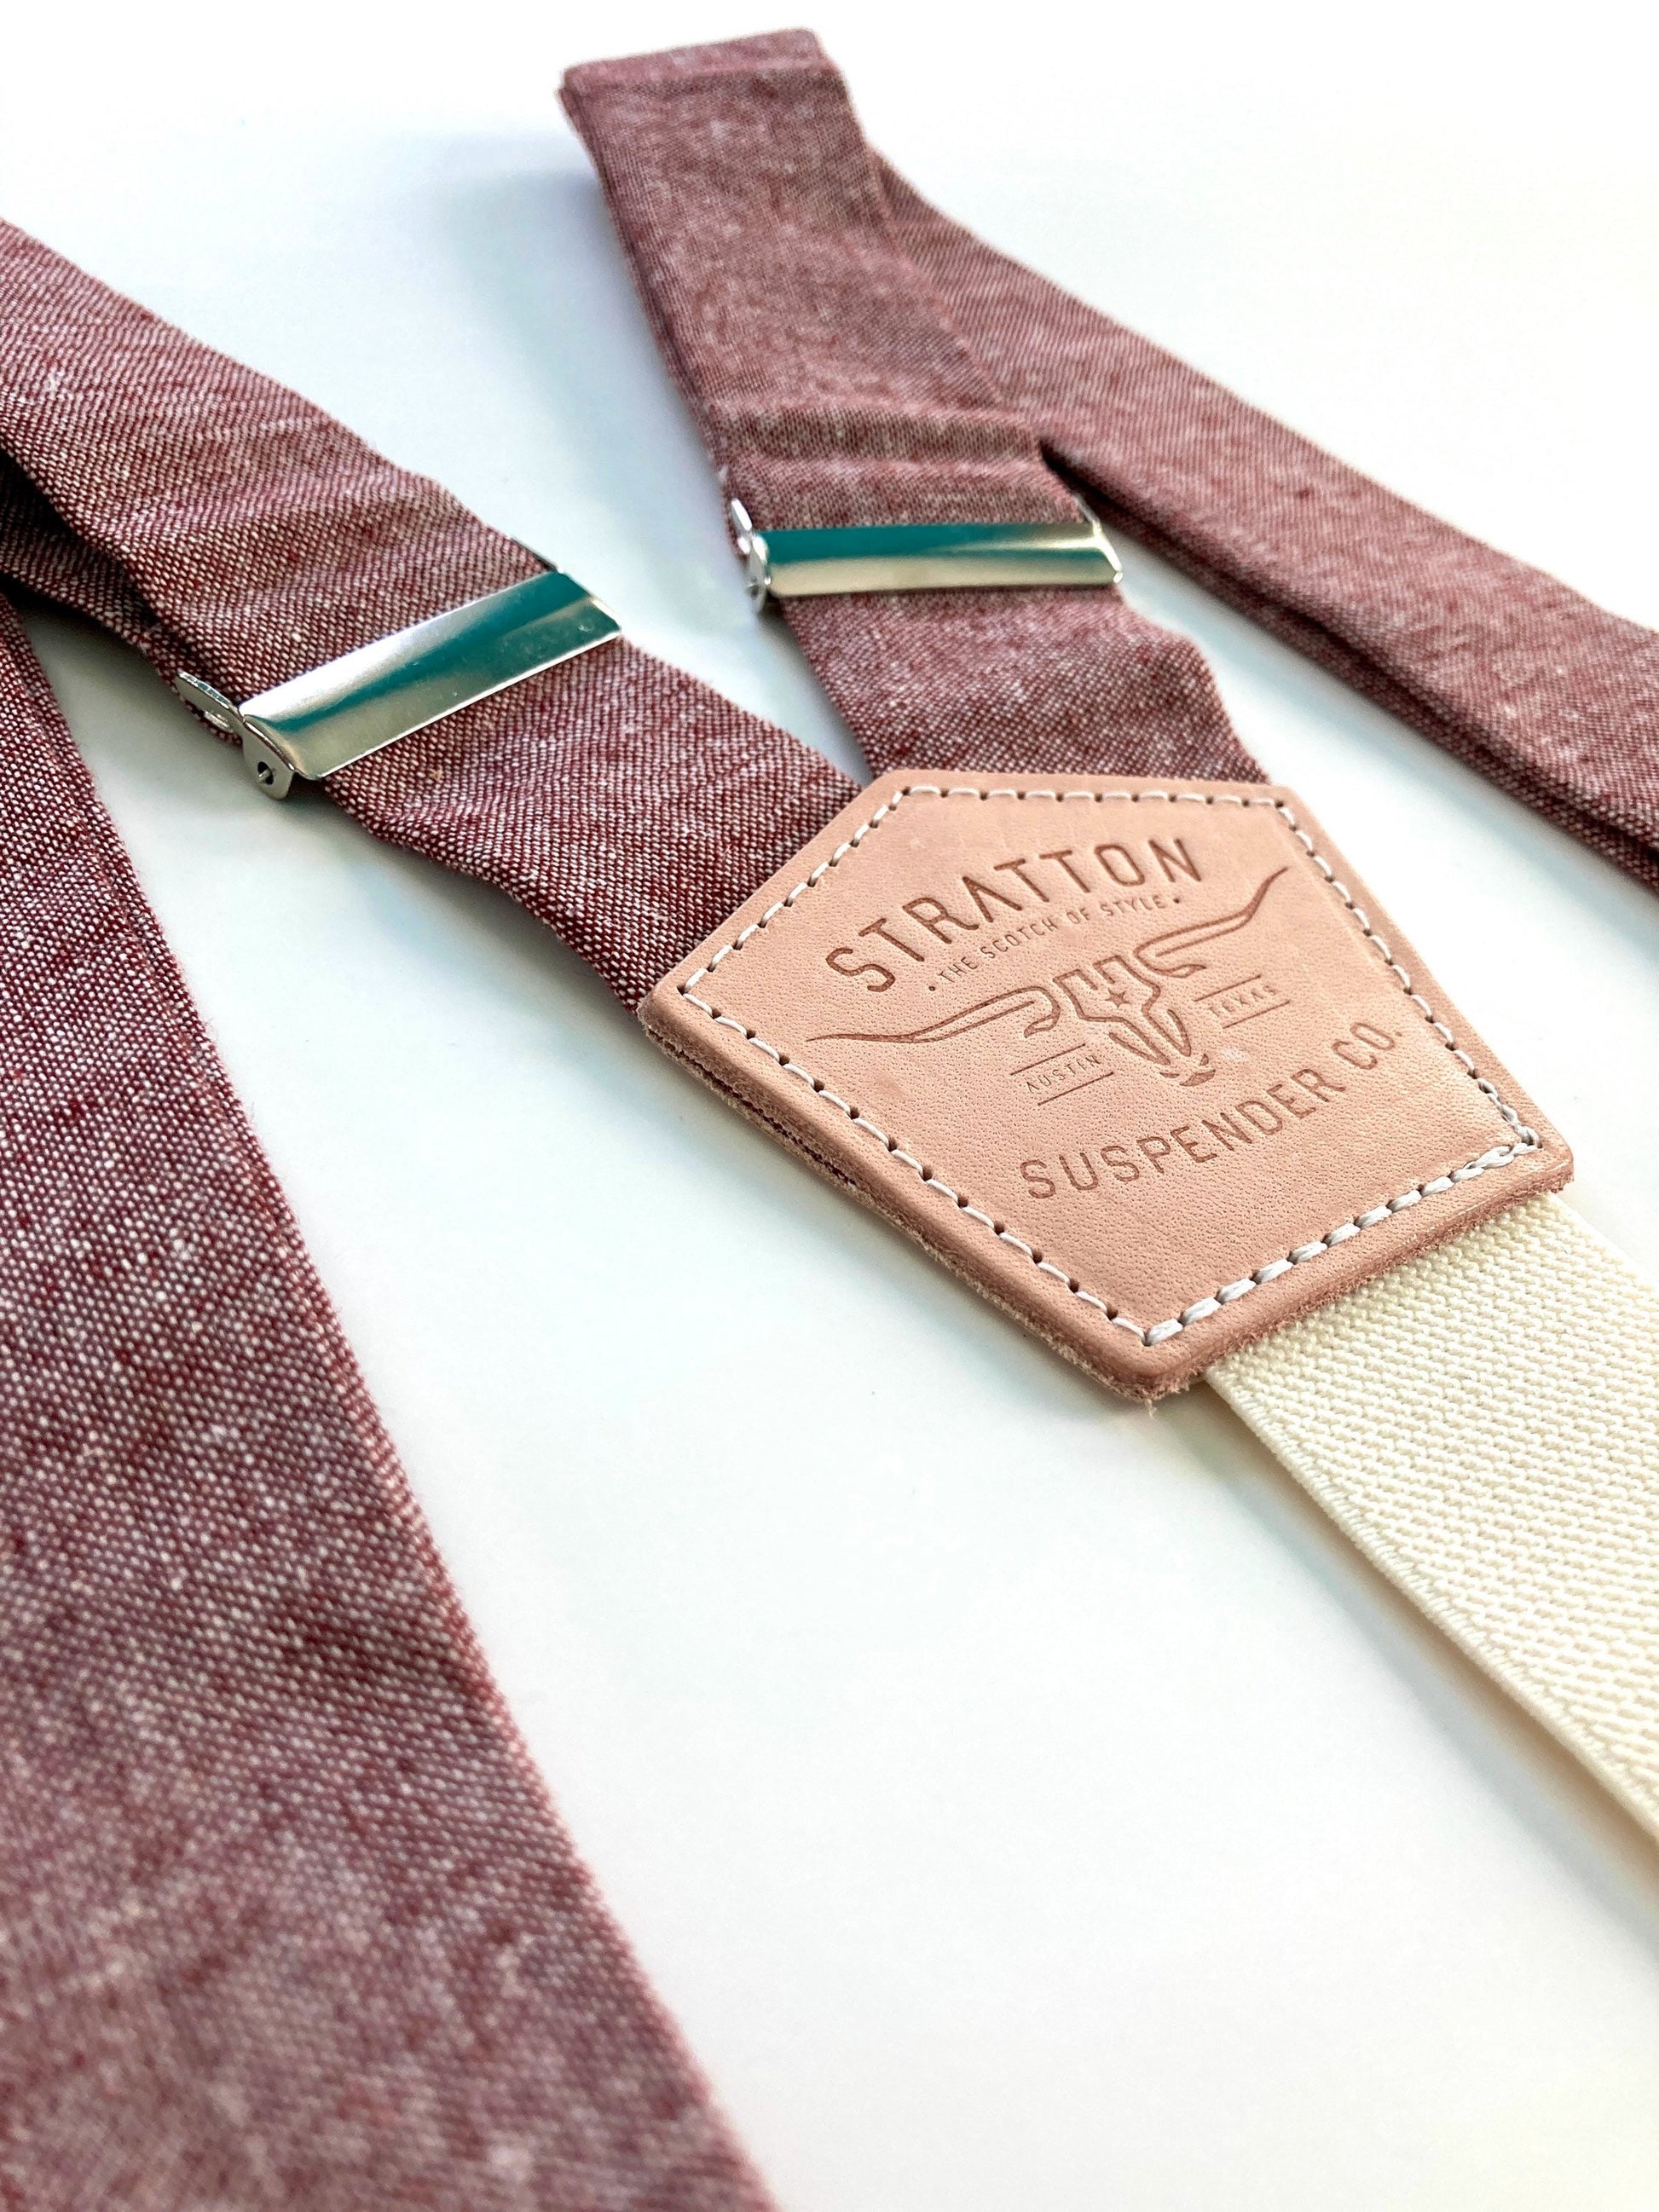 Stratton Suspender Co. features the maroon linen suspenders on veg tan shoulder leather with cream colored elastic back strap for the Fall 2022 suspenders collection